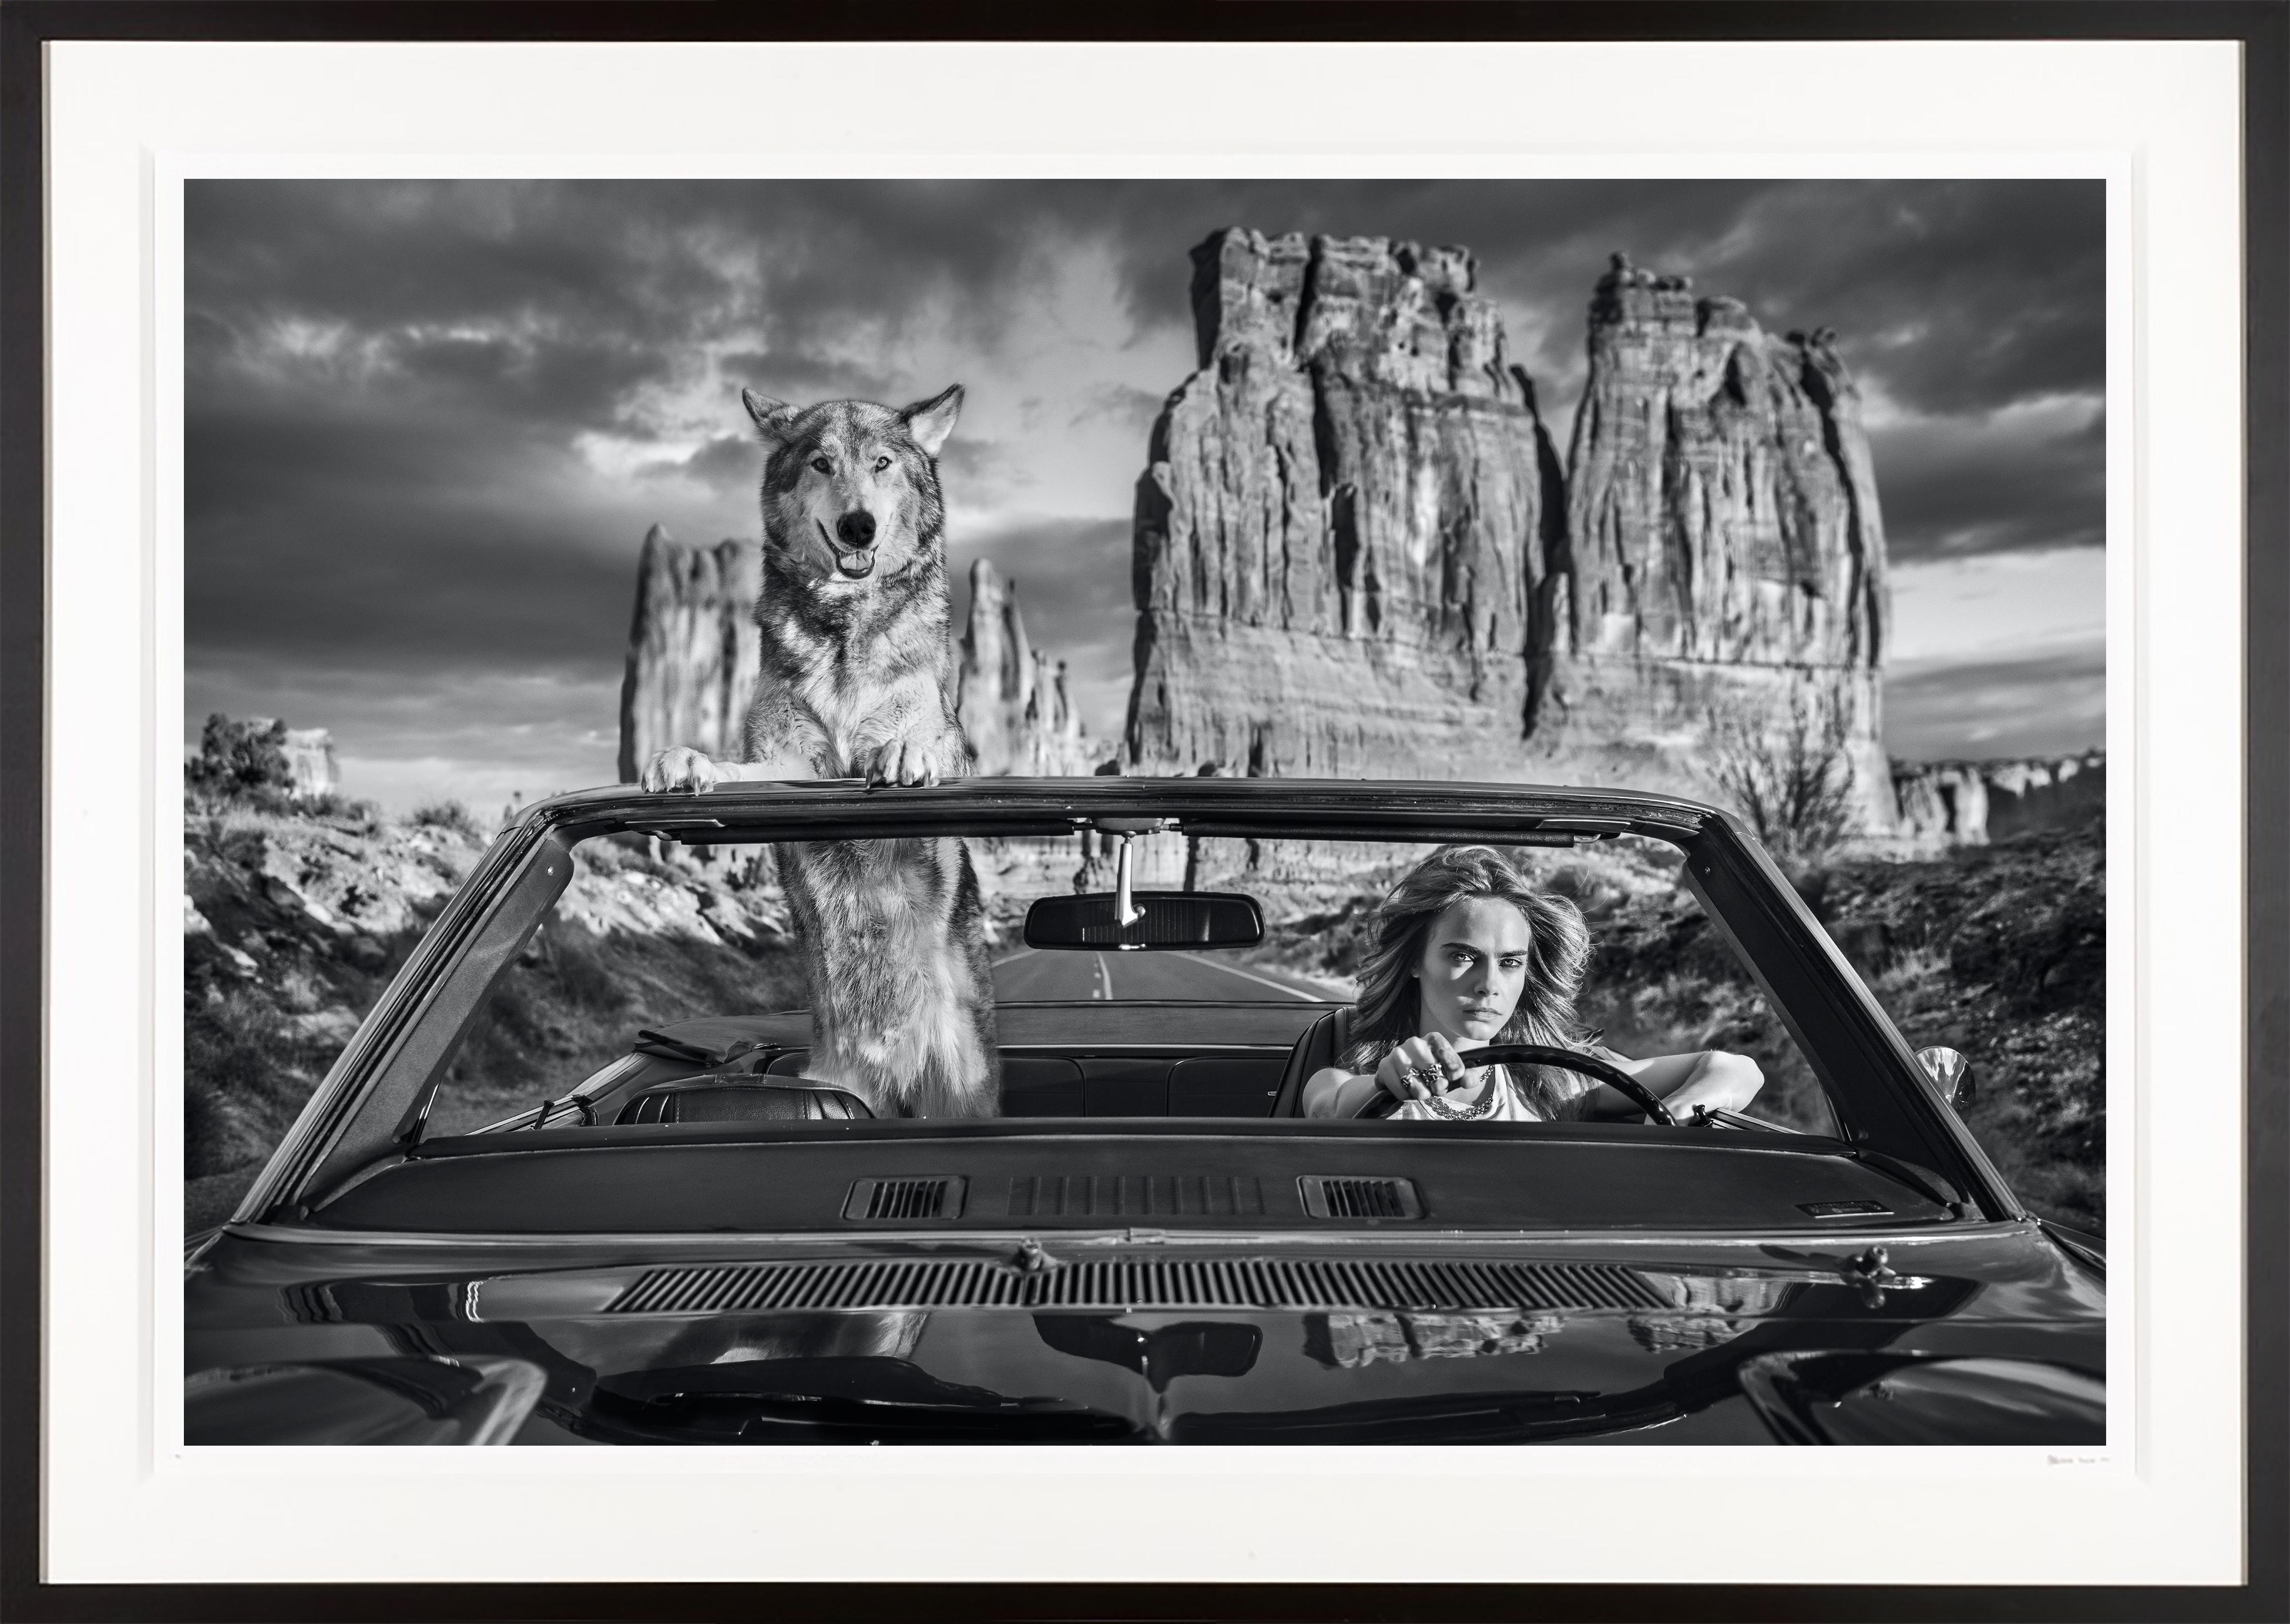 David Yarrow Black and White Photograph - "Drive" Sexy Cara Delevingne in Arches National Park, Utah with Wolf